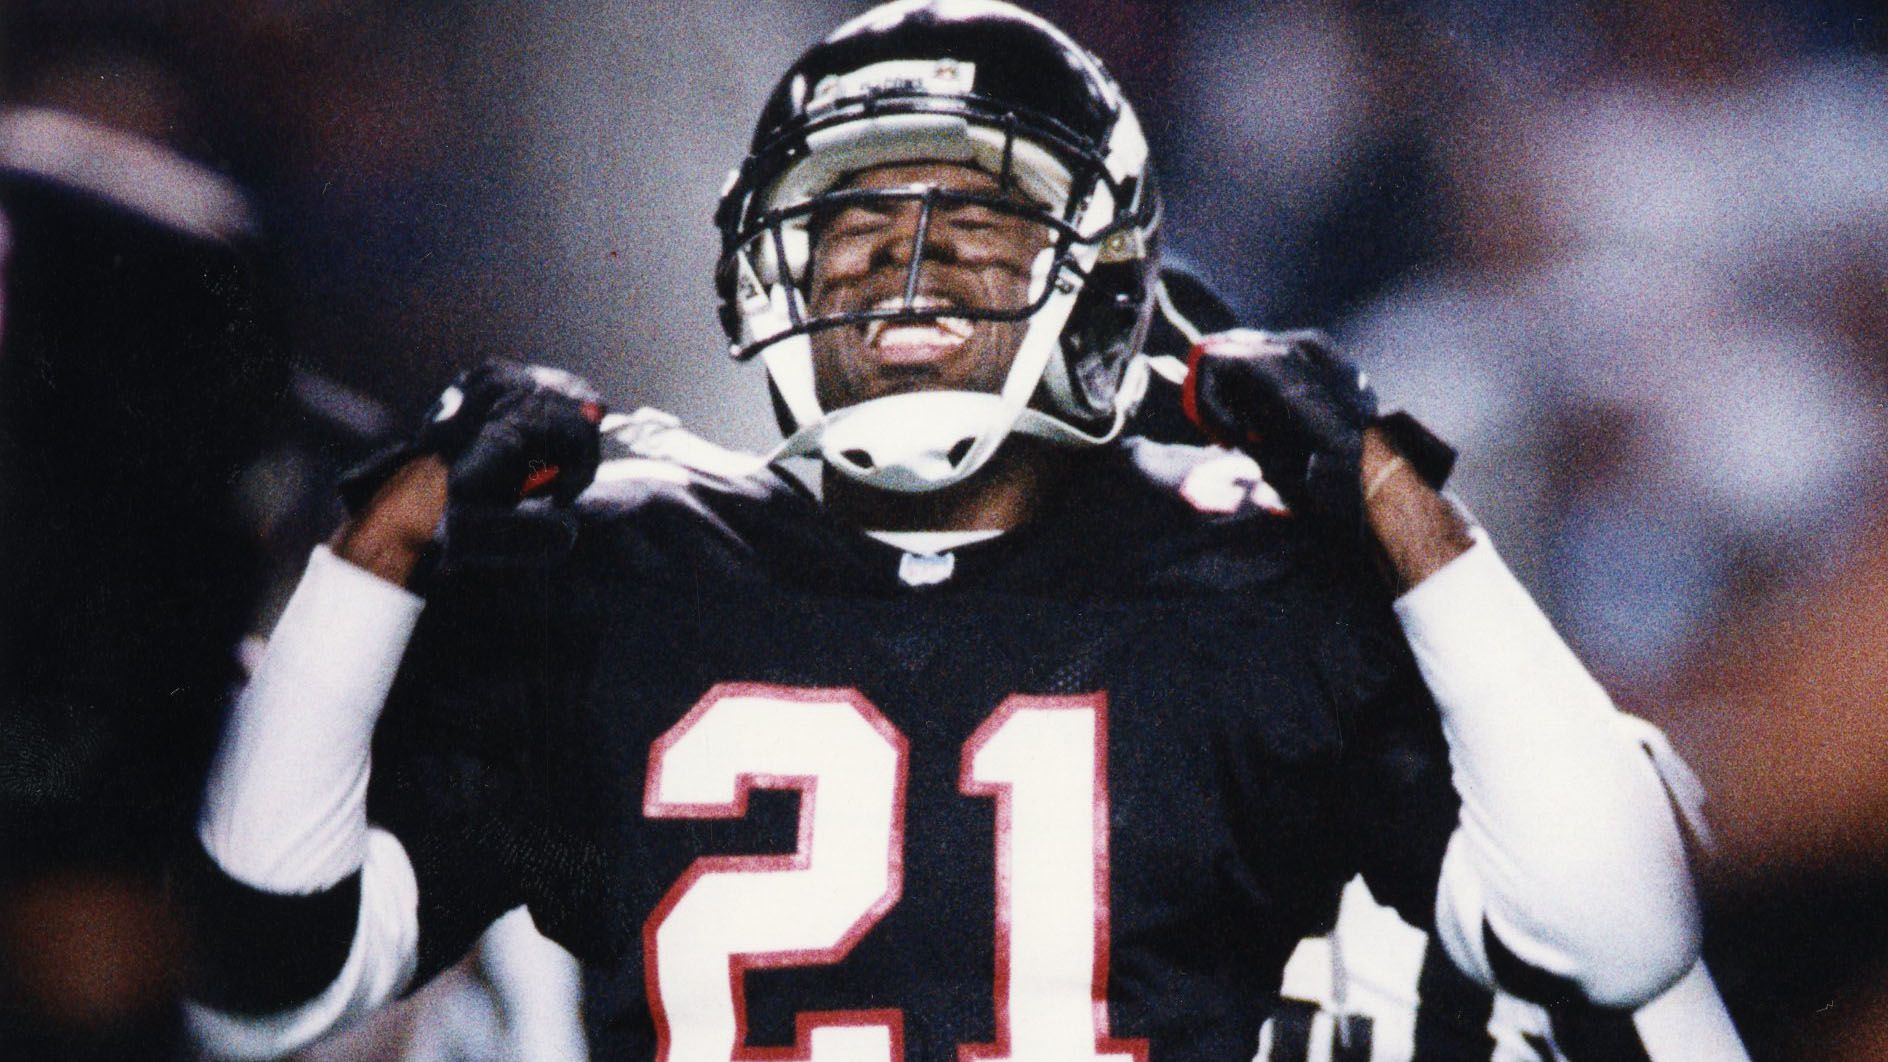 1991- Full-time Brave or Falcon? Last year Deion Sanders played